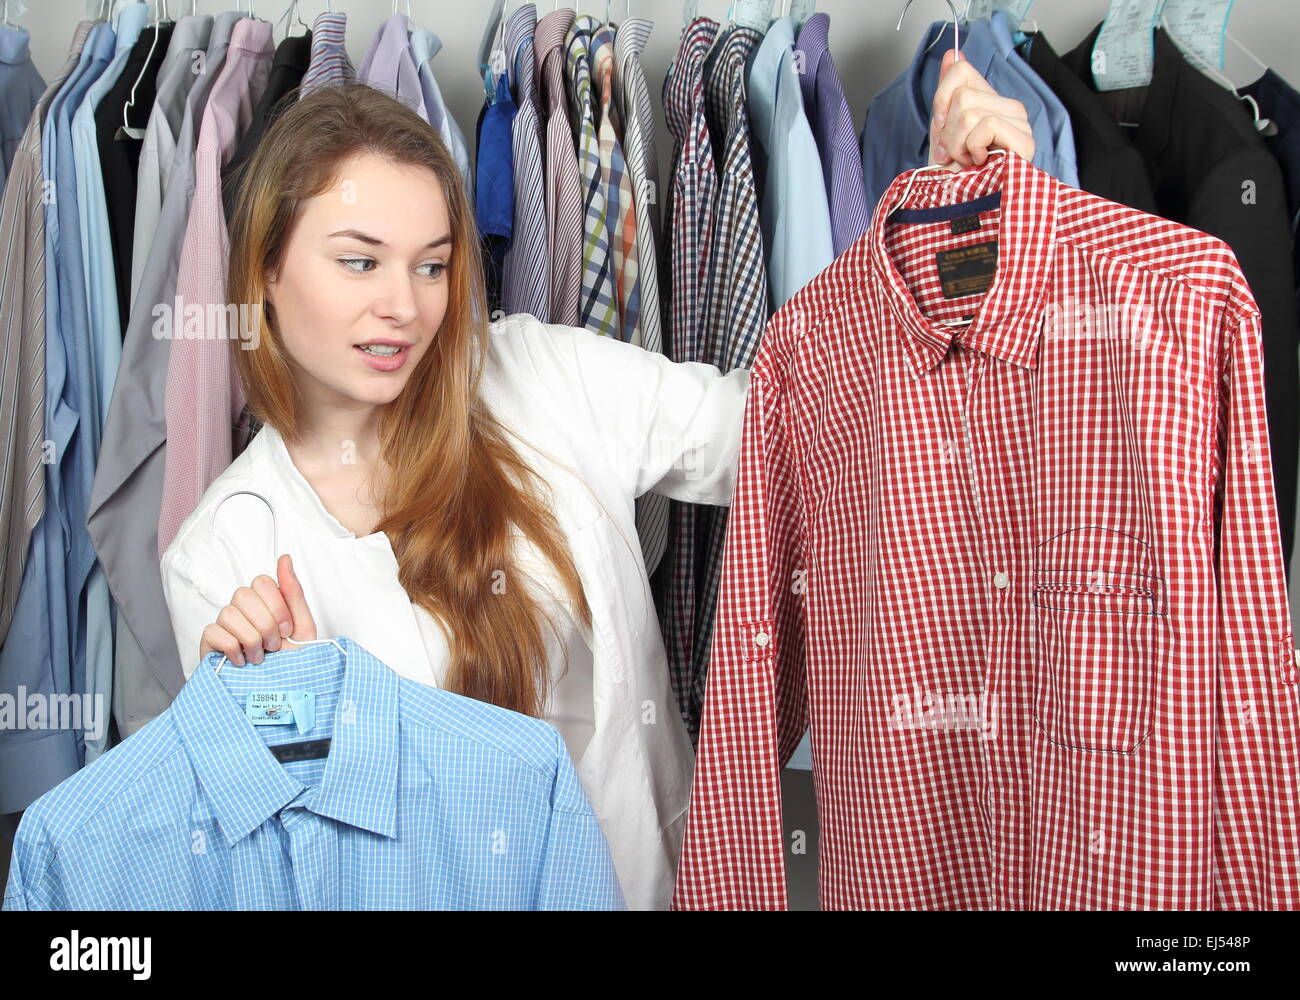 A Woman in Dry cleaning with two dirty shirts Stock Photo